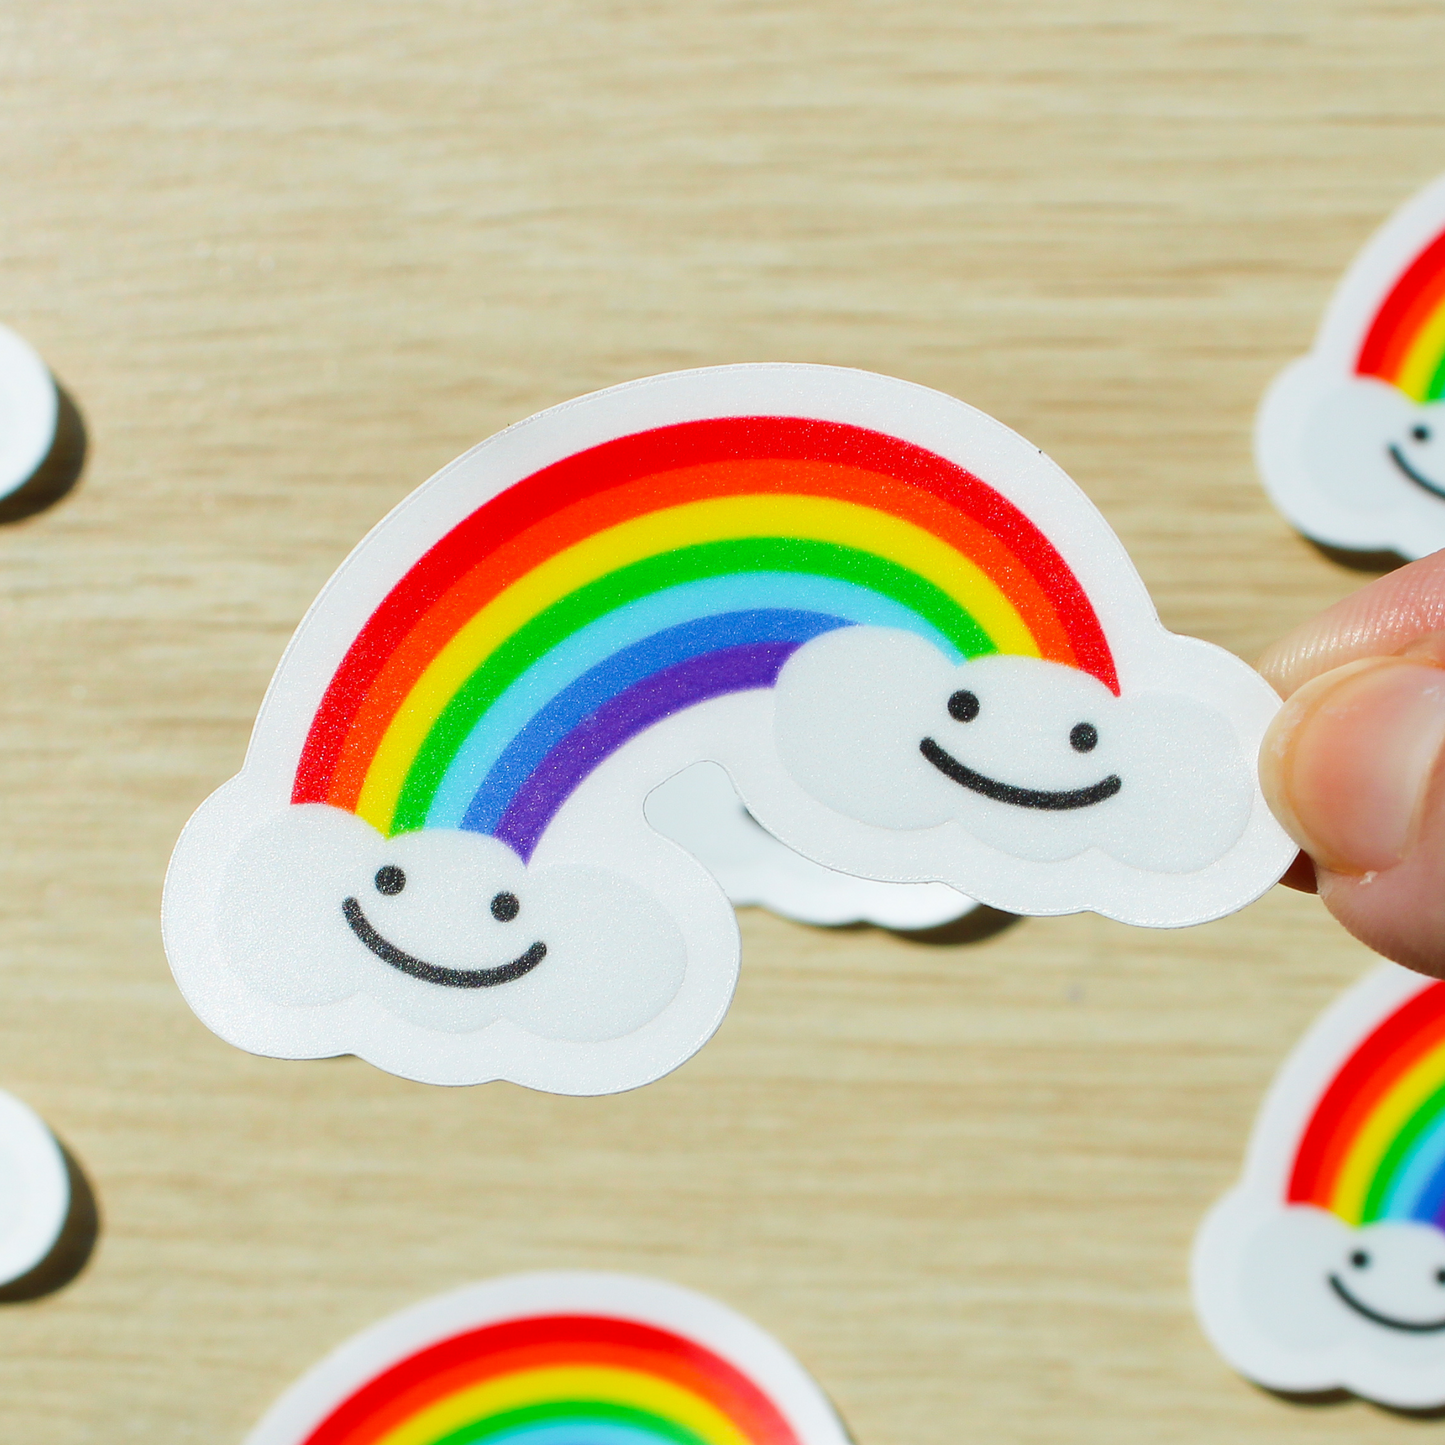 A wooden background with rainbow stickers on the ground. In the front is a hand holding a sticker that has a rainbow with two clouds on either end smiling.